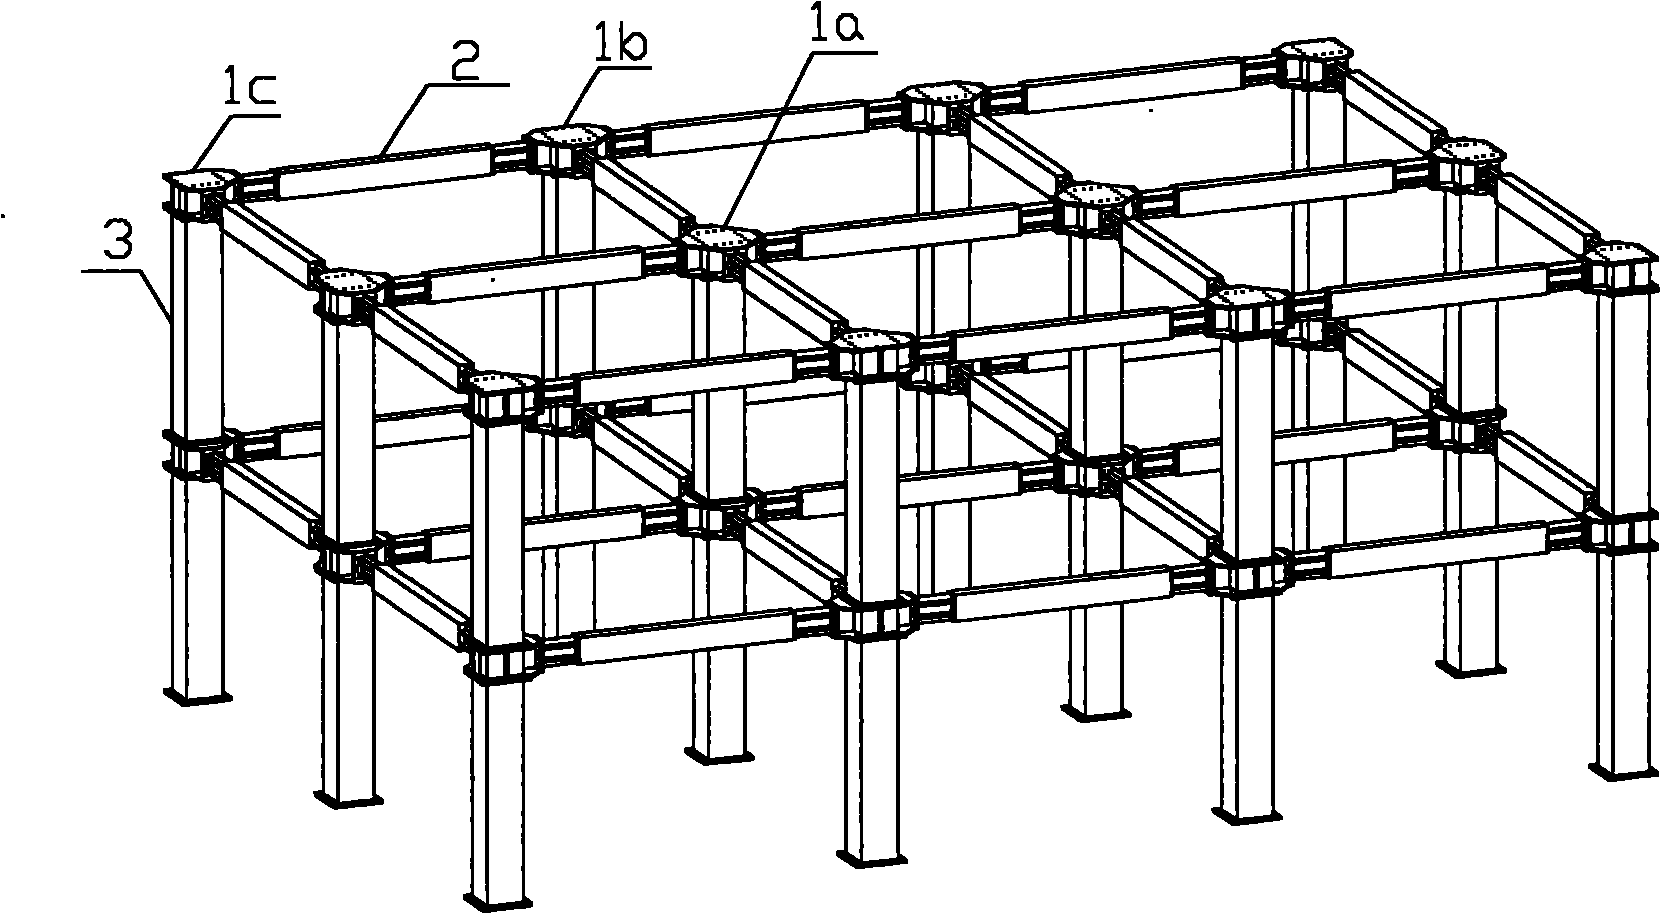 Steel joint precast and assembled reinforced concrete frame structure